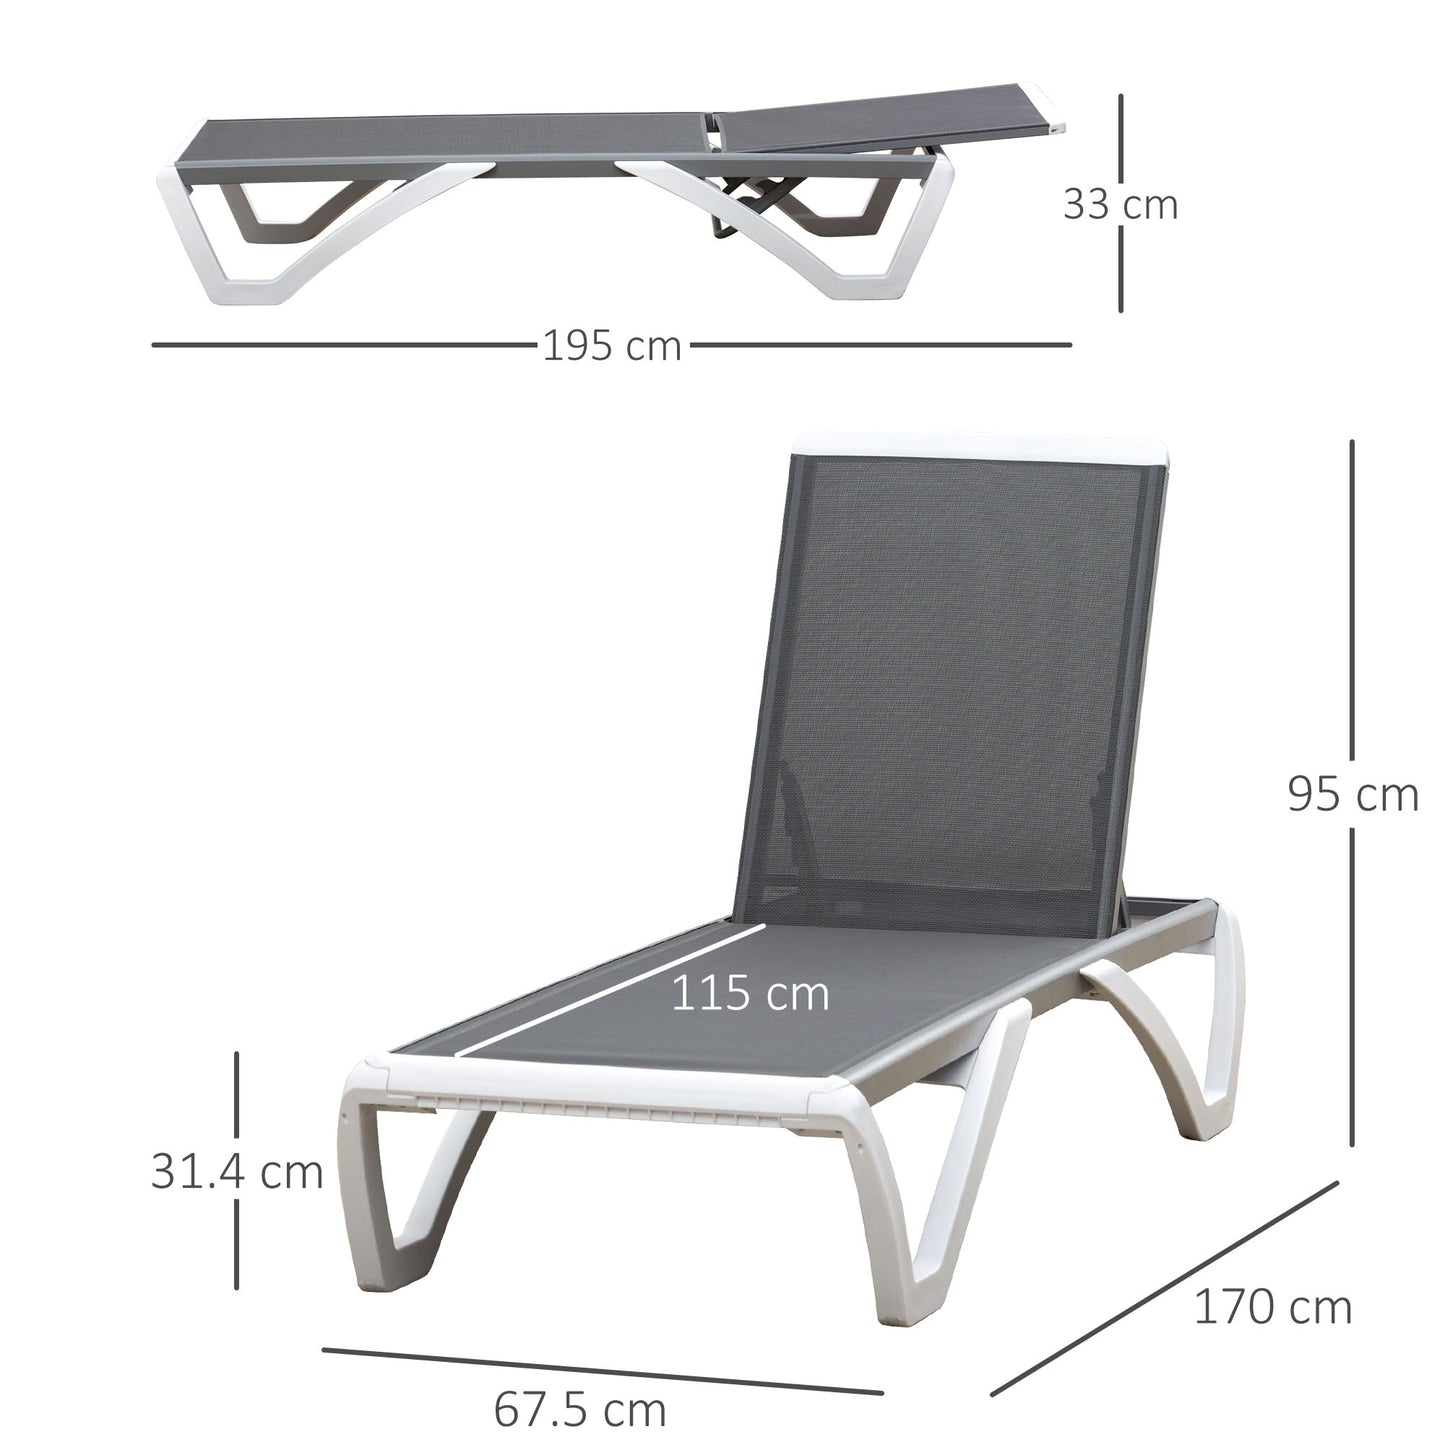 Outsunny Portable Outdoor Chaise Lounge, with Adjustable Back, Breathable Texteline, Light Grey